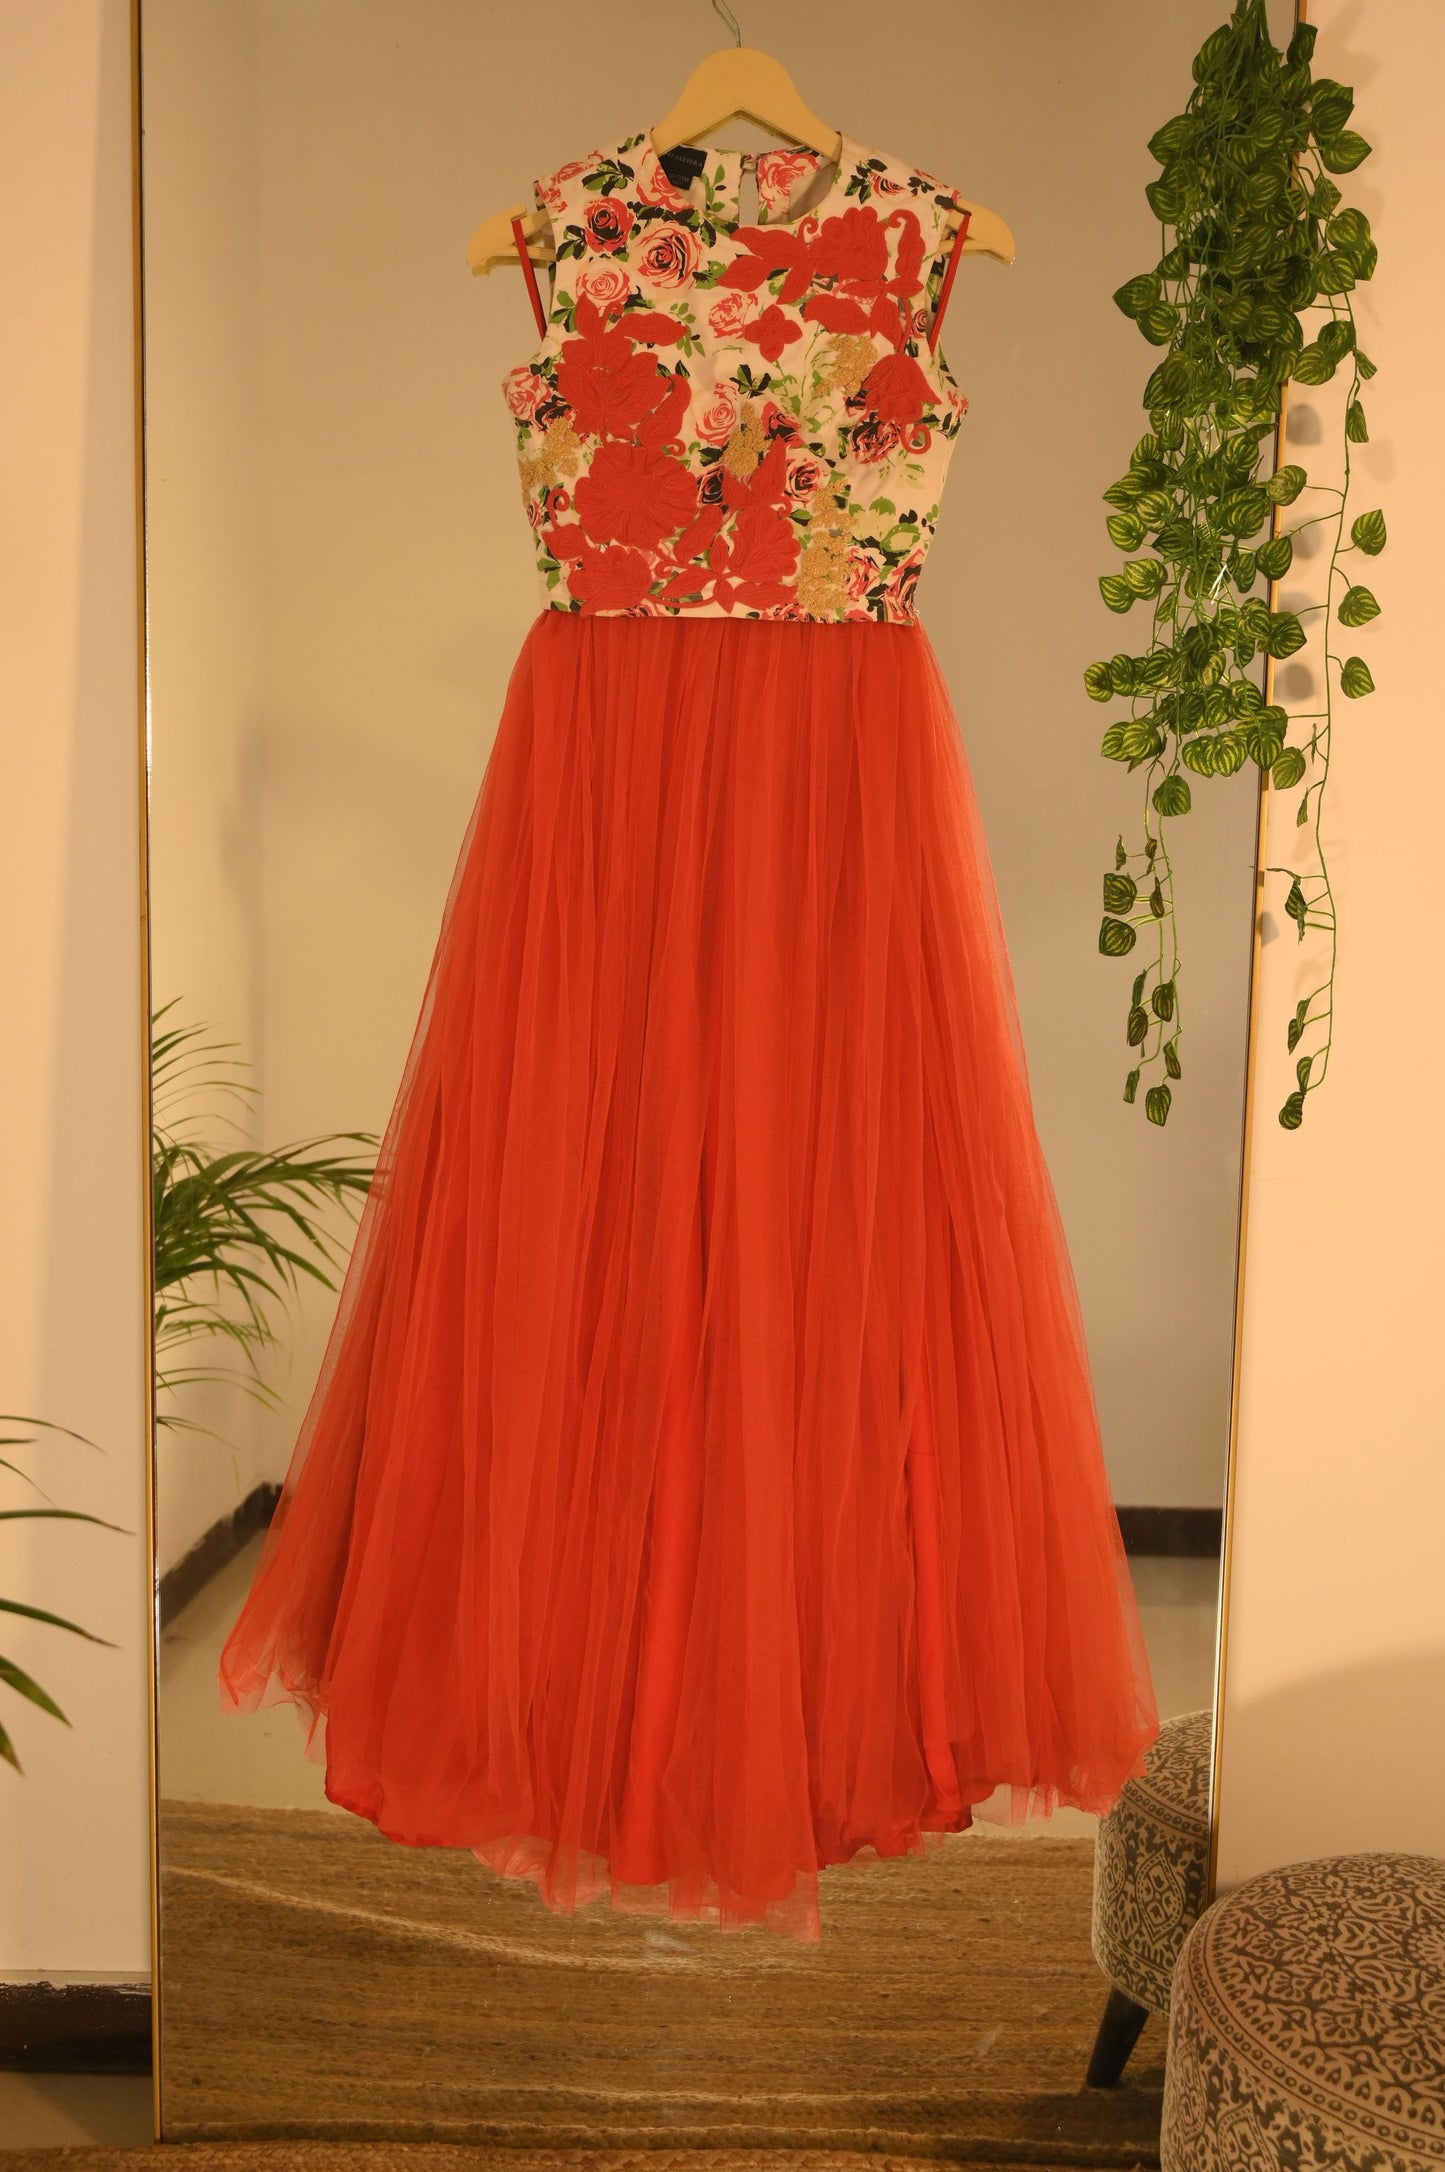 Printed and embroidered Bodice with red lehenga